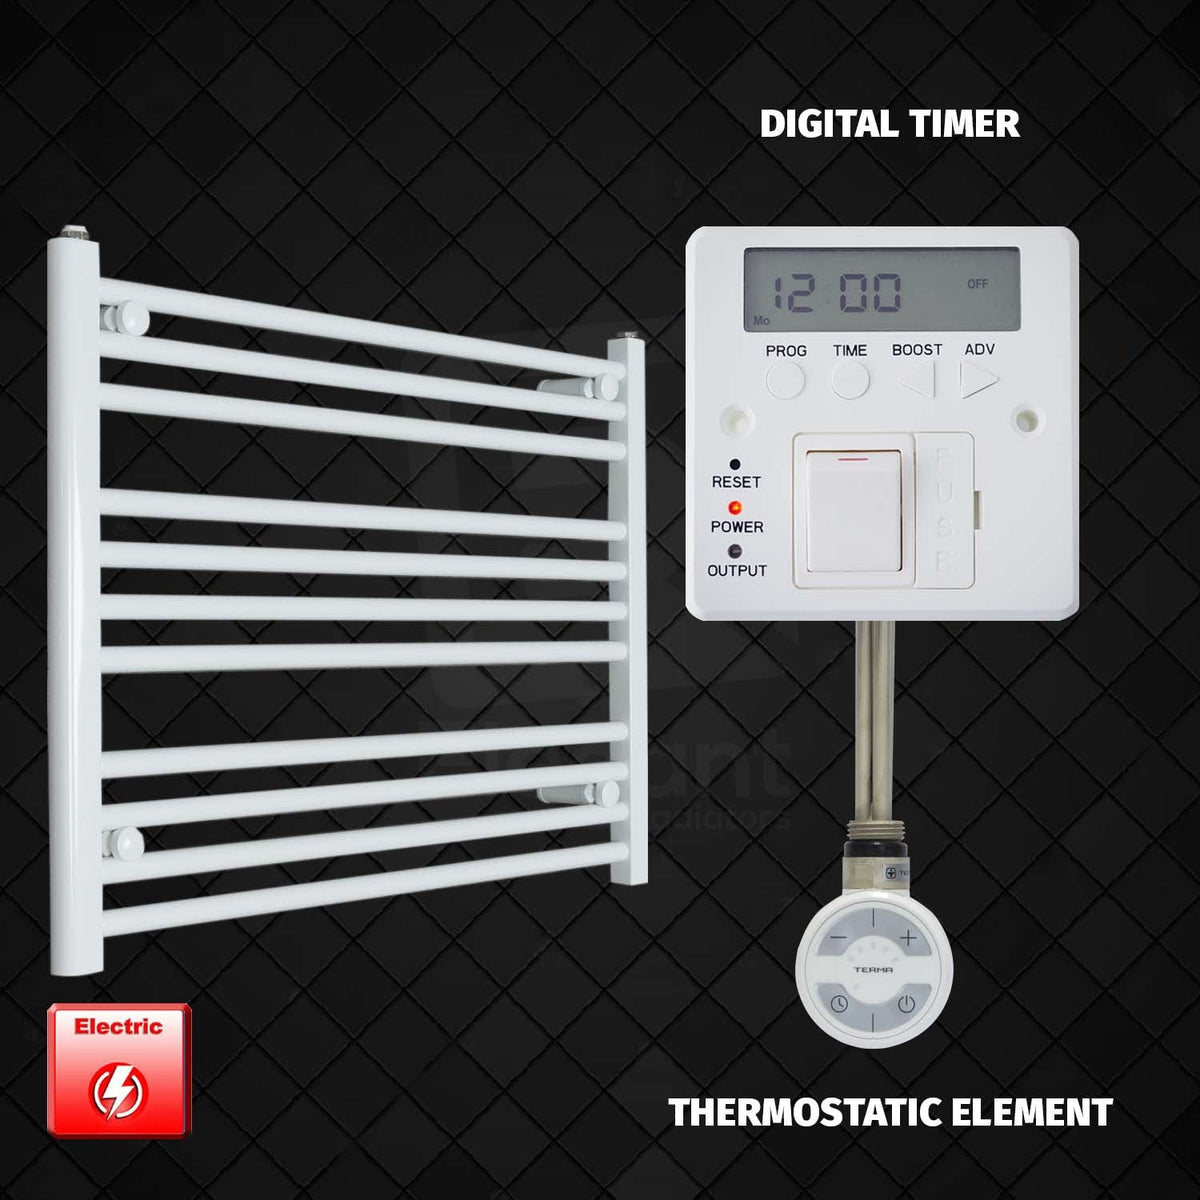 600 mm High 750 mm Wide Pre-Filled Electric Heated Towel Radiator White HTR MOA Thermostatic element Digital timer